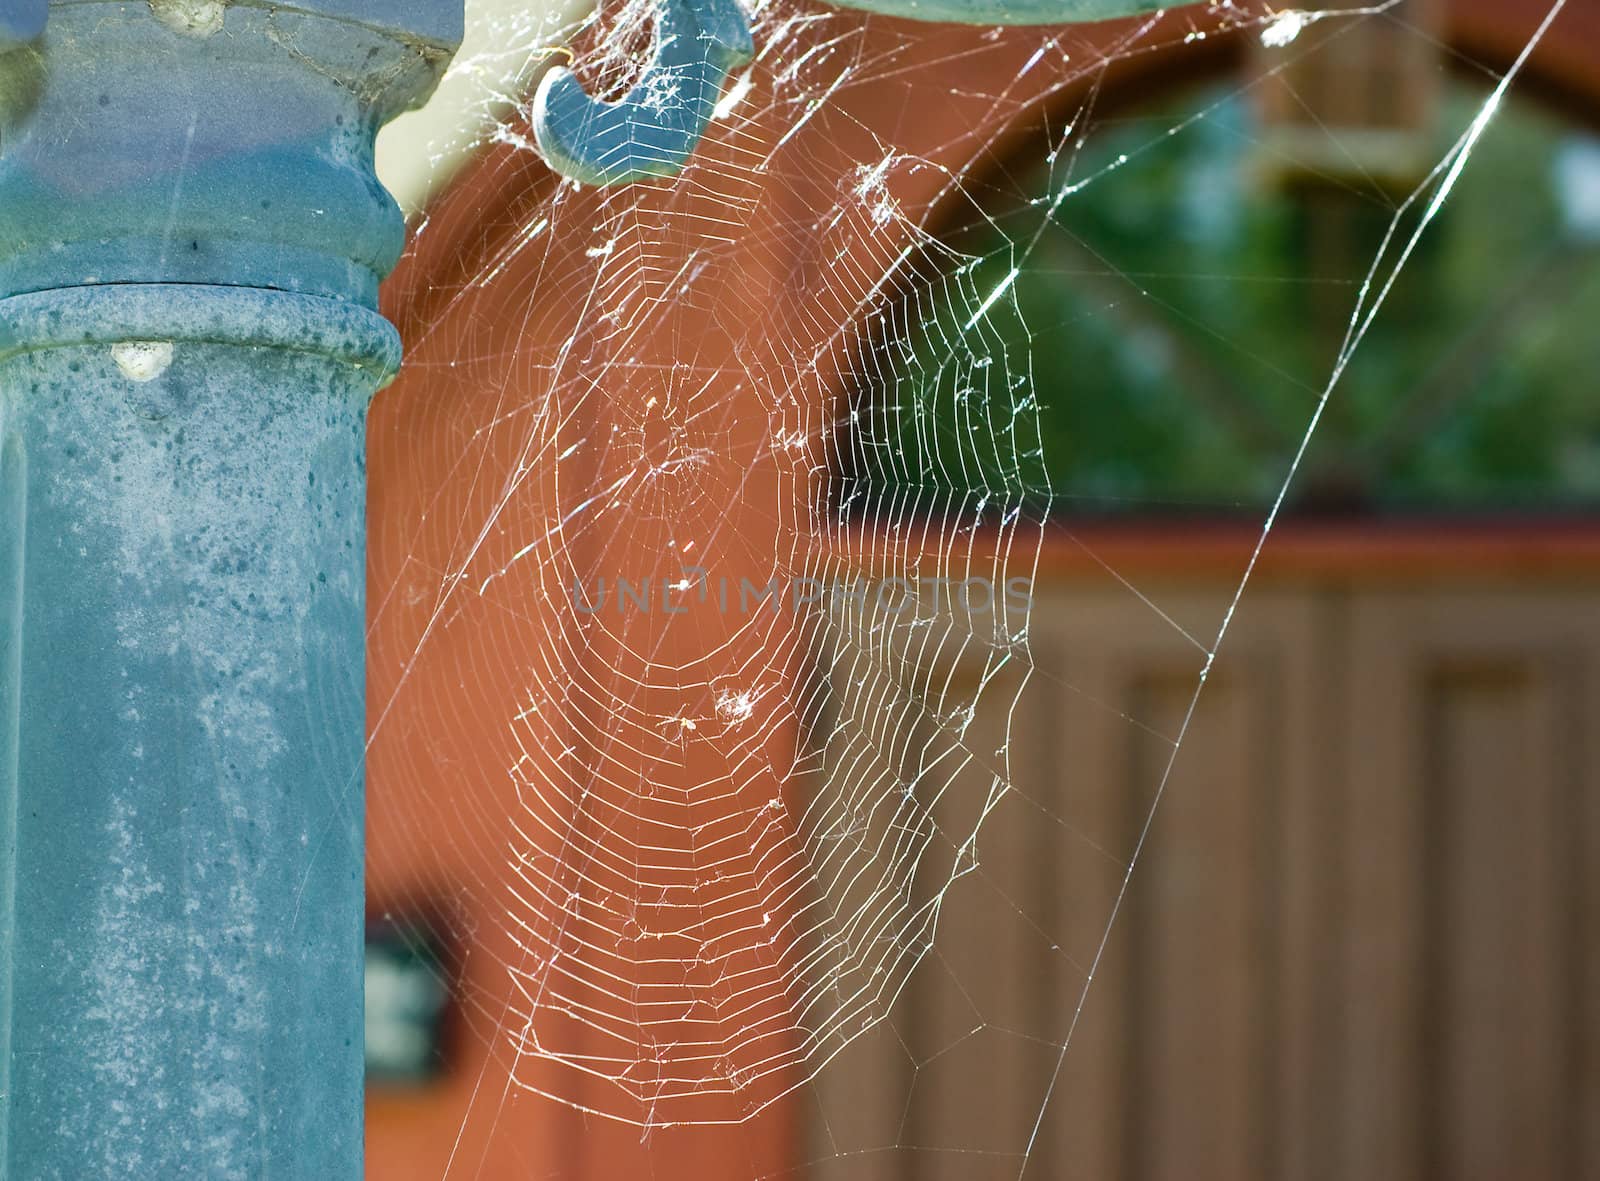 A spiders cobweb hanging from a lamp pole